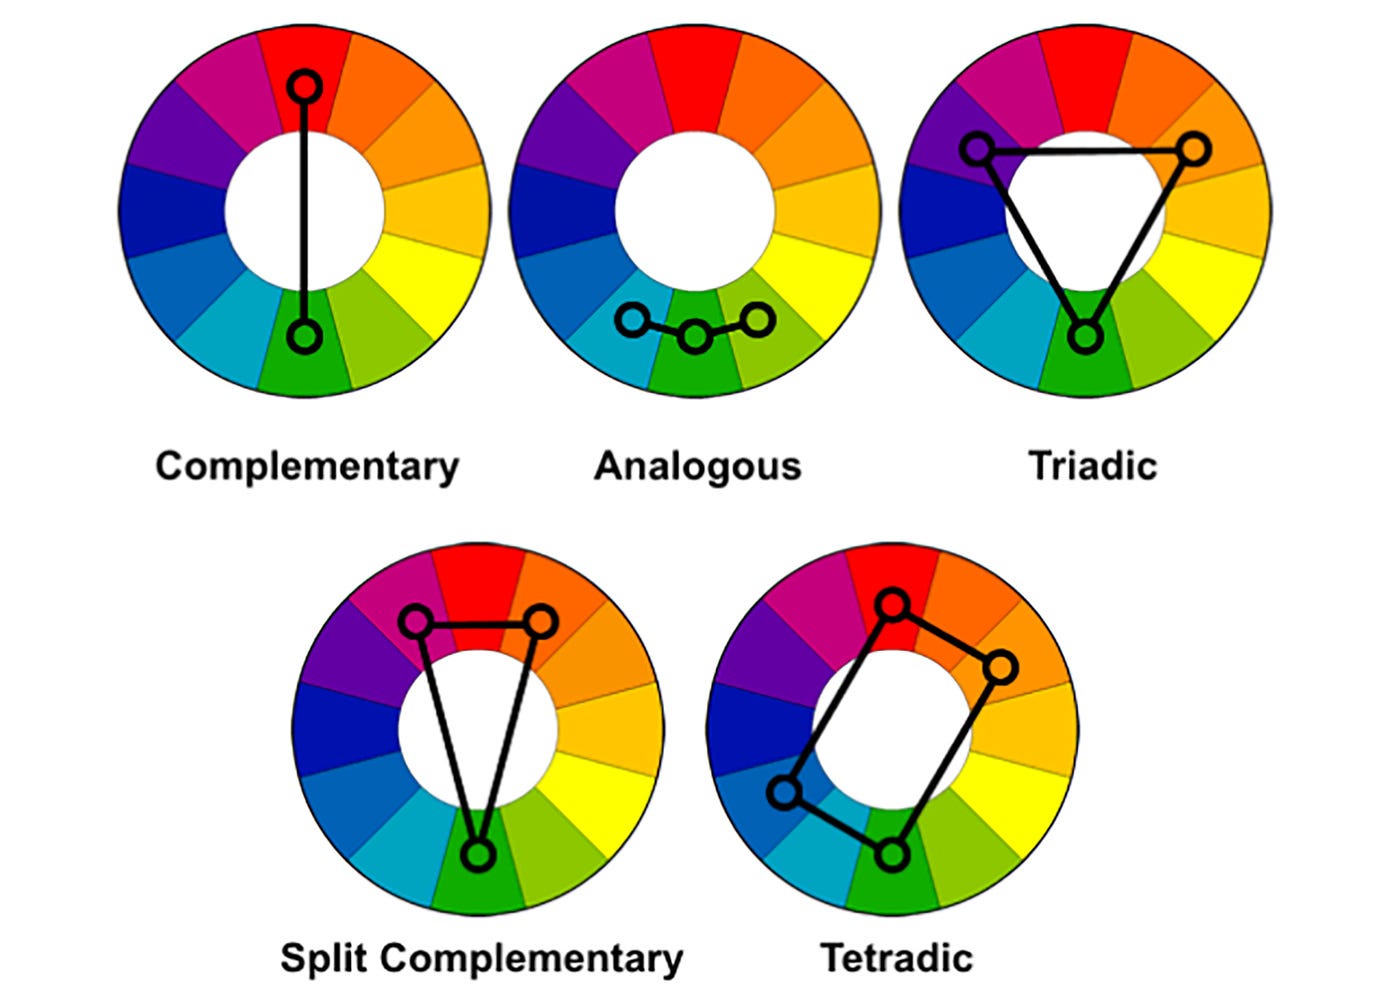 The ultimate guide to understanding color theory in design